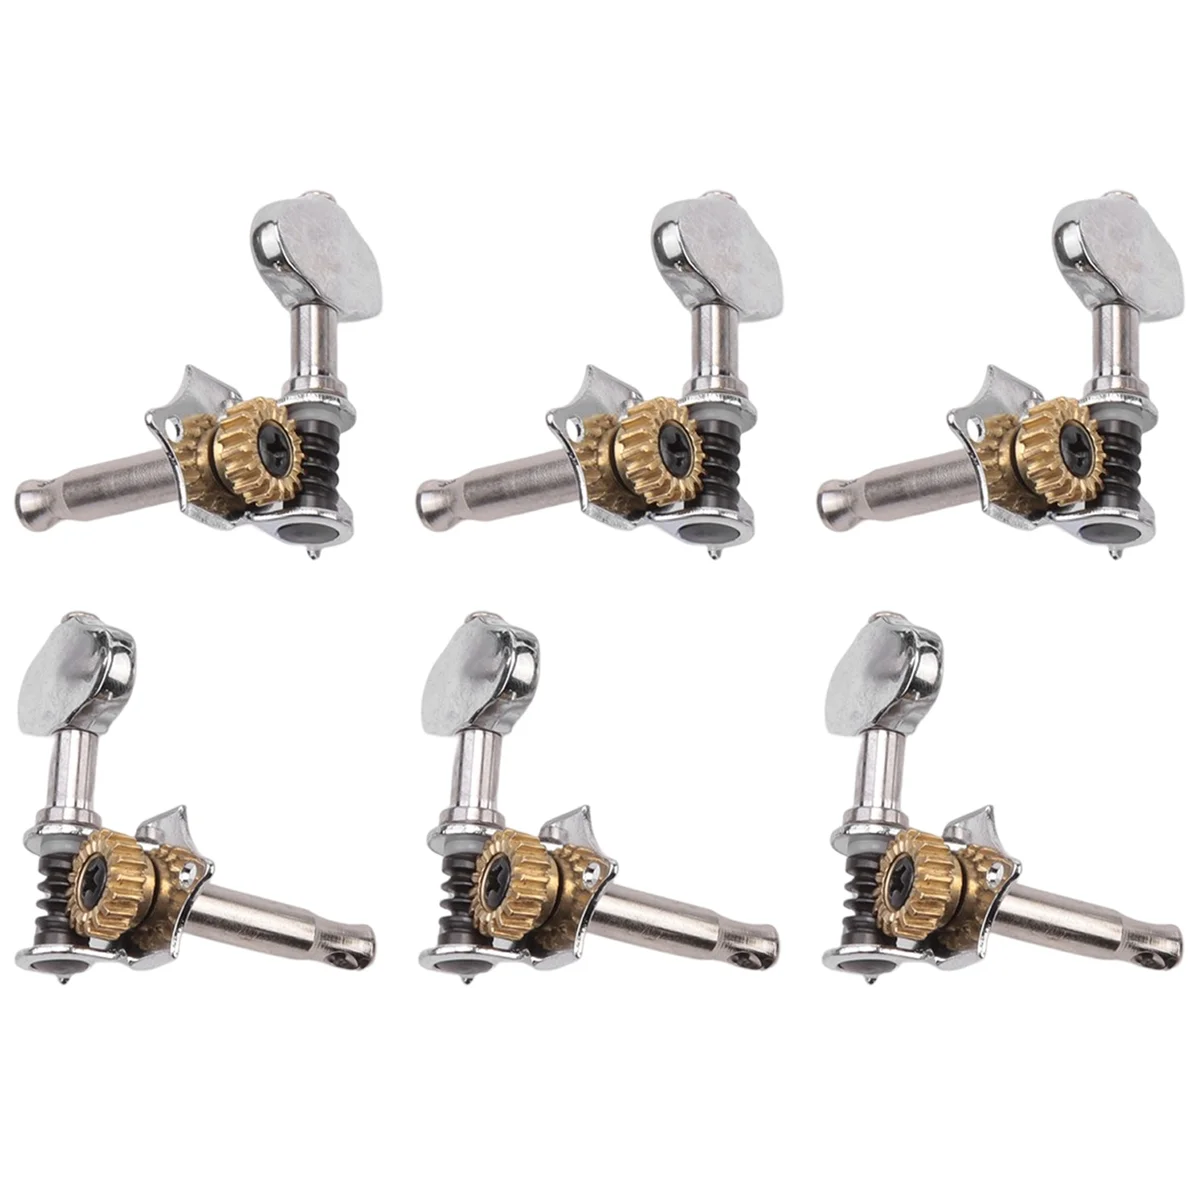 

3L3R 6Pcs 1:18 Guitar String Tuning Pegs Tuner Machine Heads Knobs Tuning Keys for Acoustic or Electric Guitar Silver